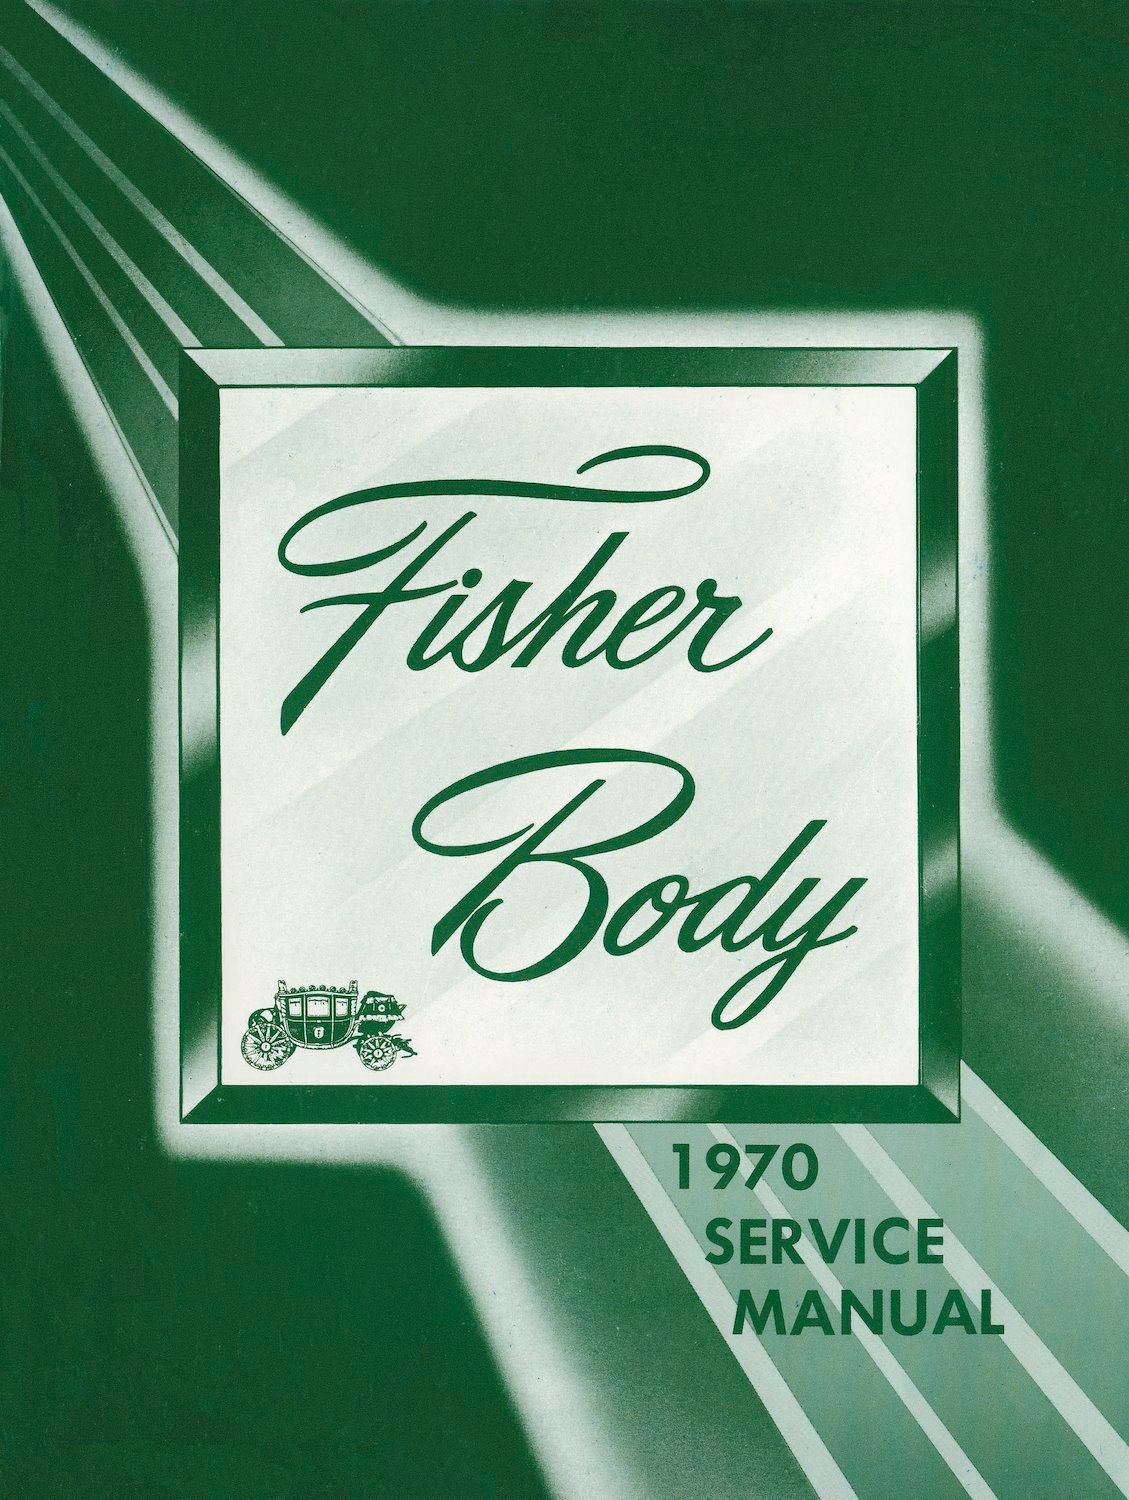 Fisher Body Service Manual for 1970 Buick, Cadillac, Chevrolet, Oldsmobile and Pontiac Models, A-B-C-D-E-G-X Body Styles